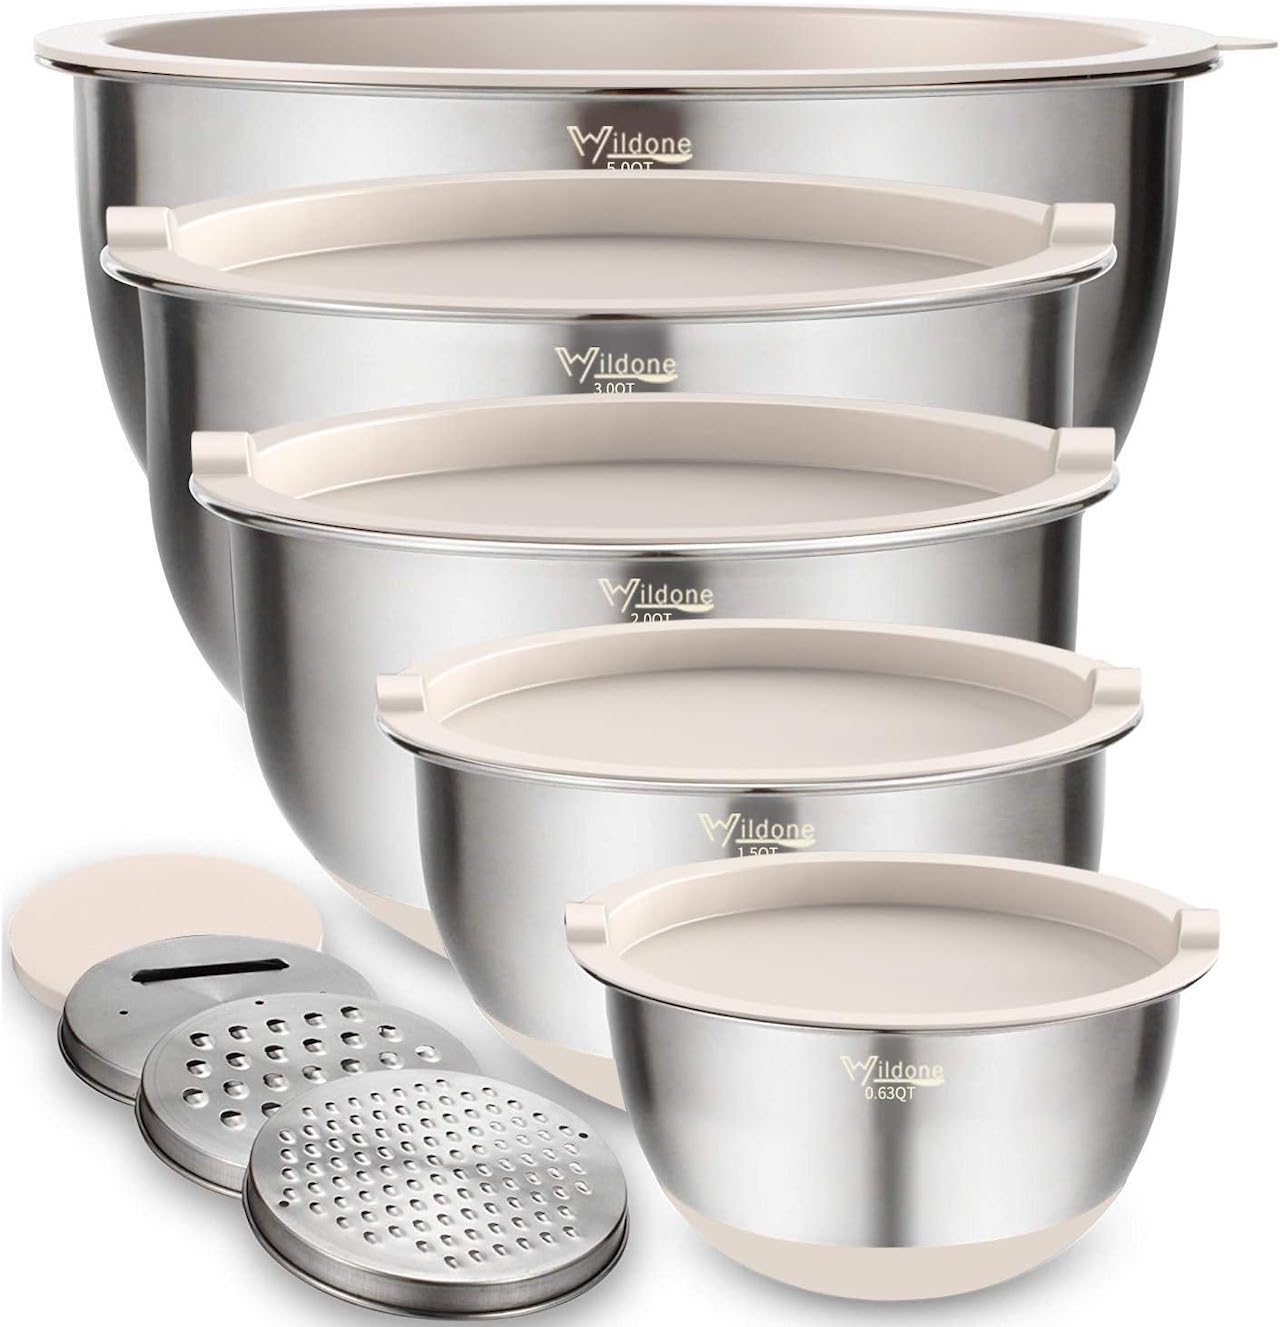 CAROTE 11pcs Pots and Pans Set with Detachable Handles Only $59.89